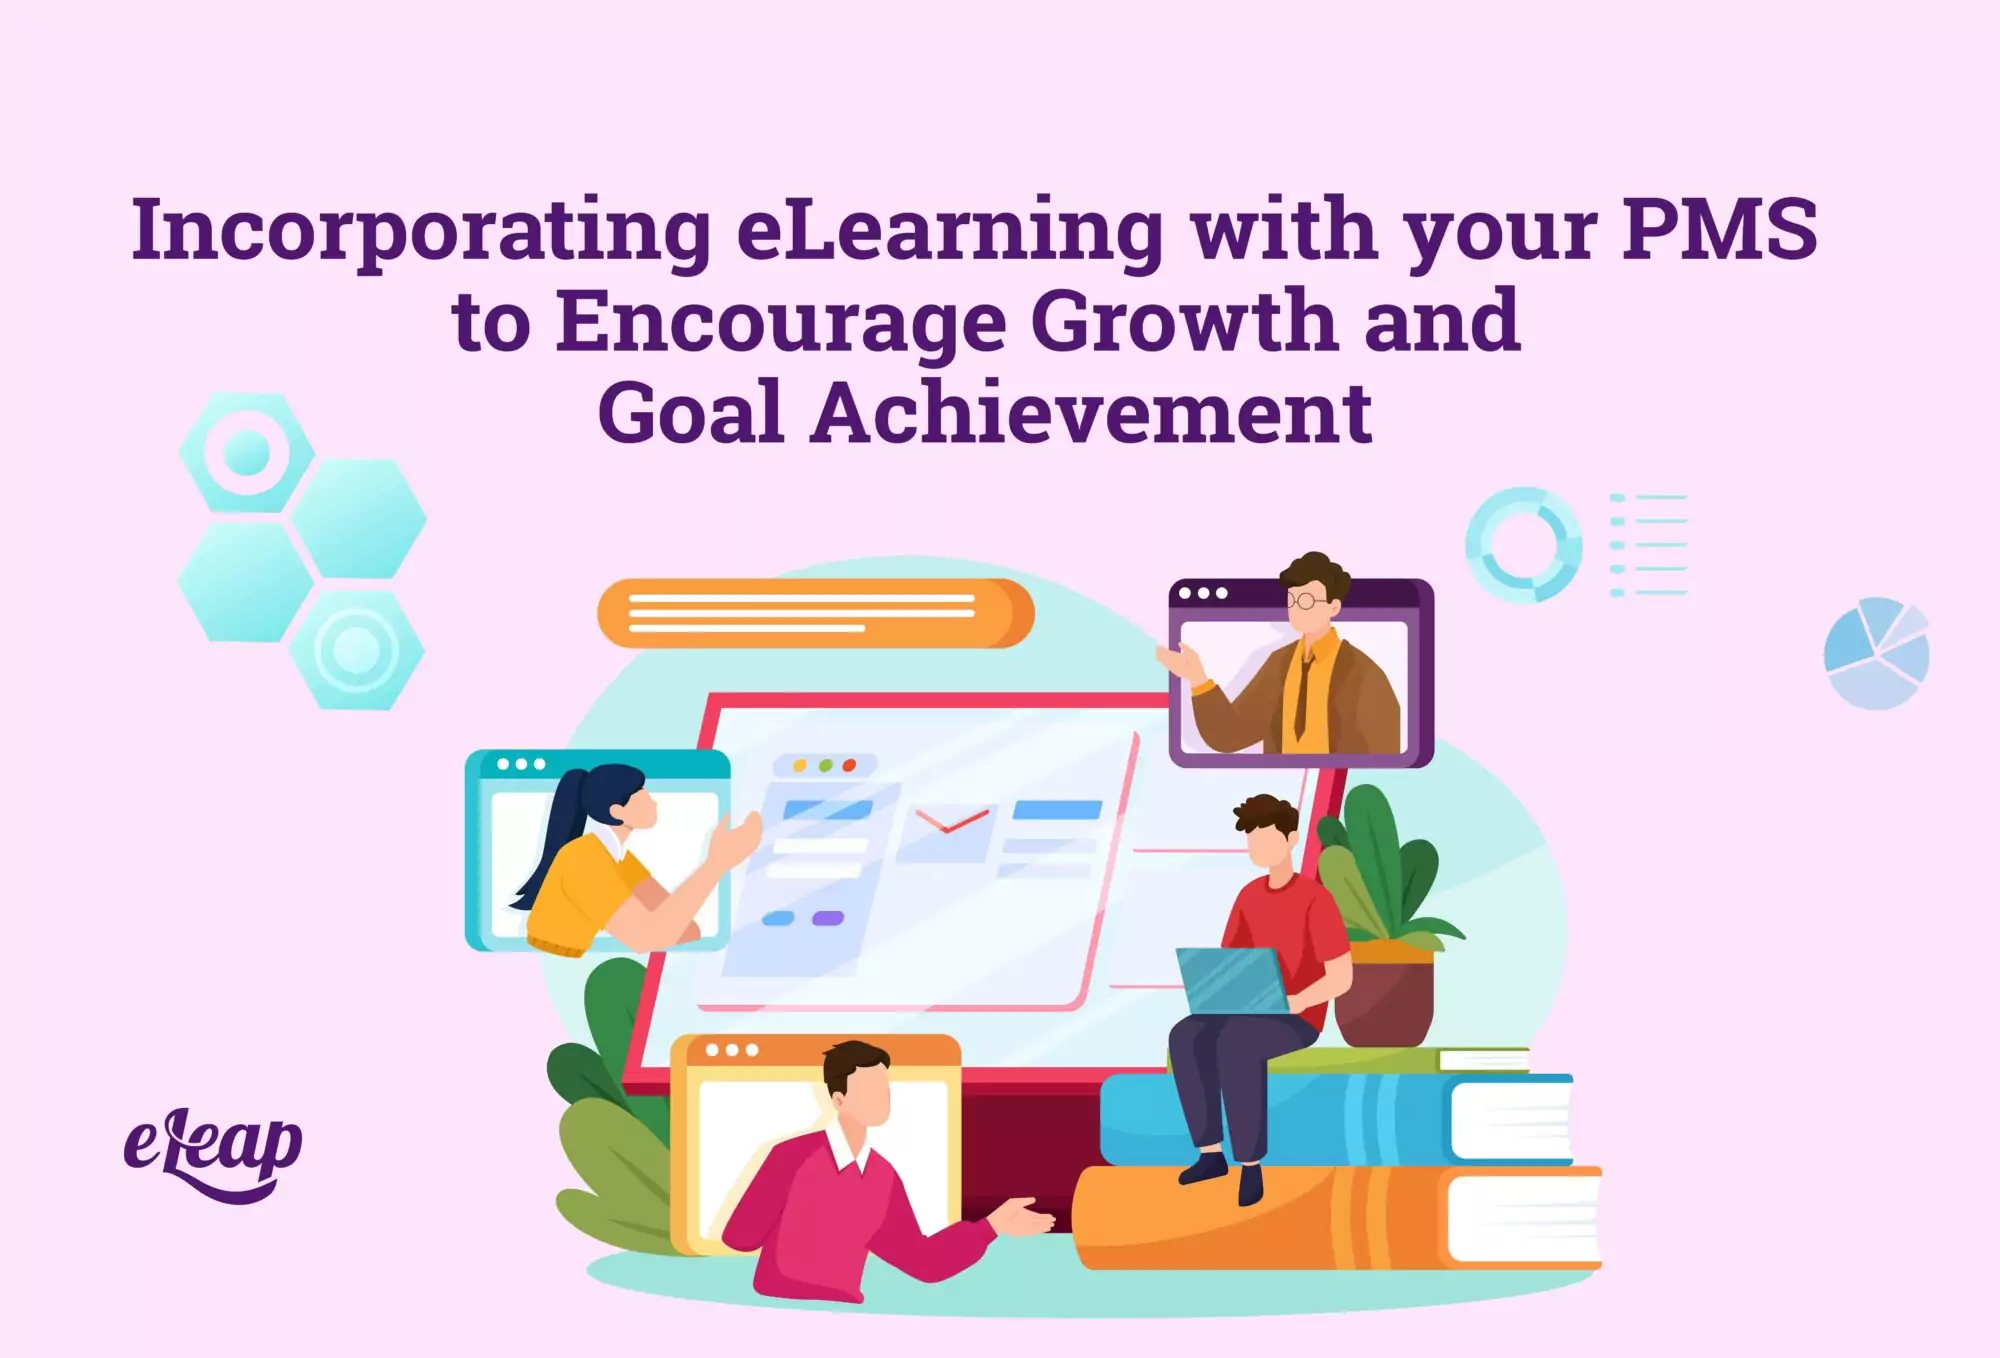 Incorporating eLearning with your PMS to Encourage Growth and Goal Achievement